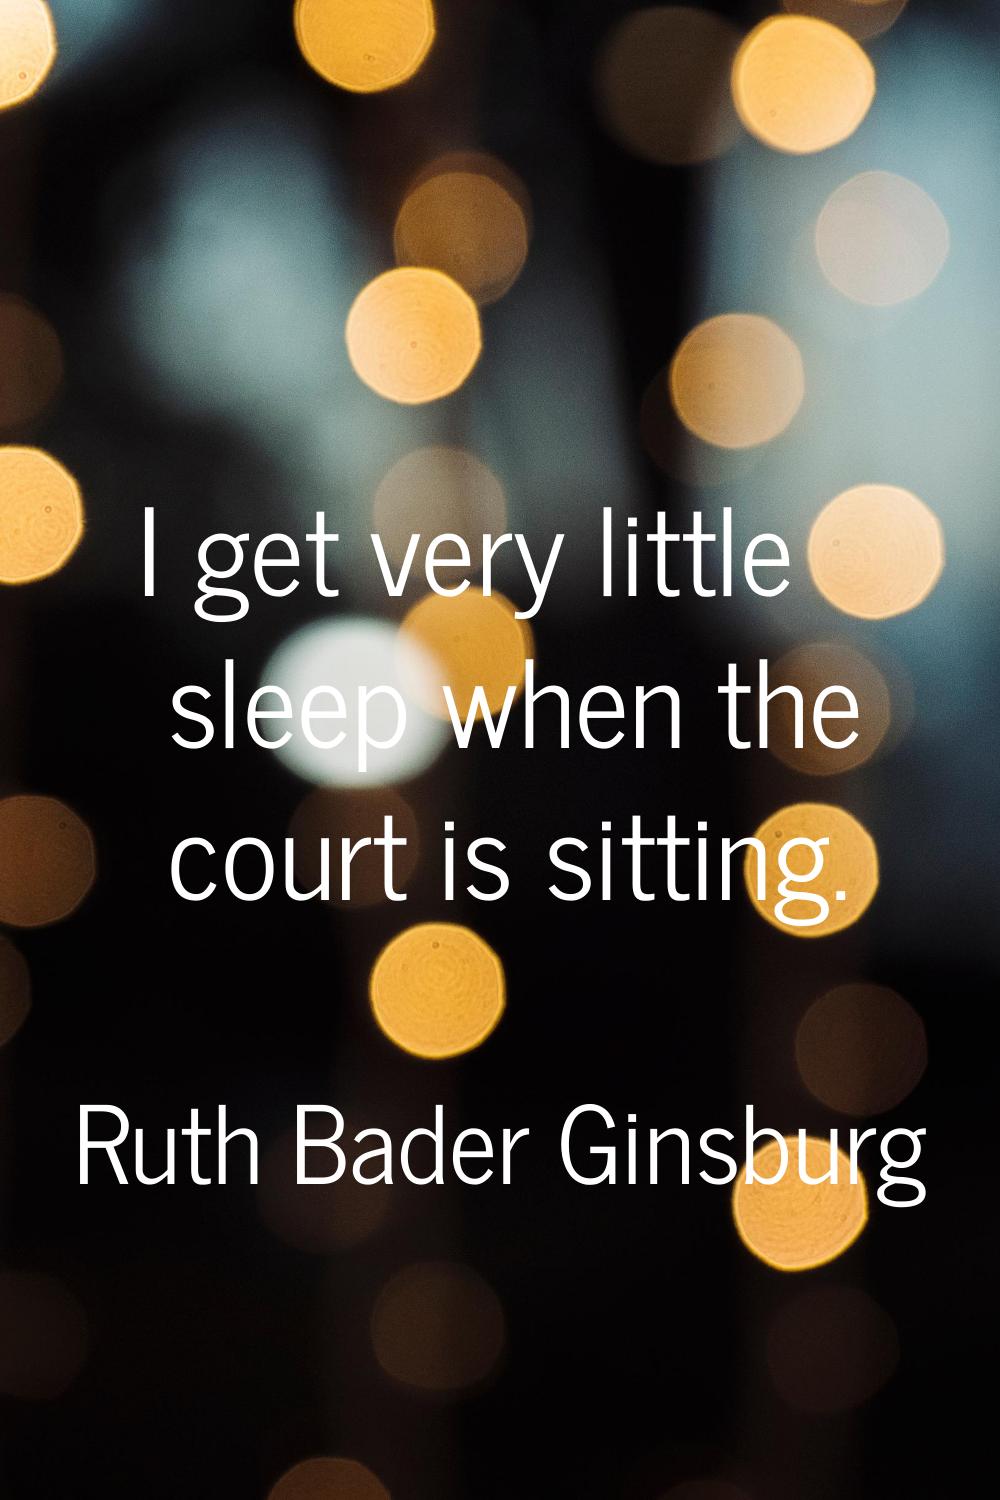 I get very little sleep when the court is sitting.